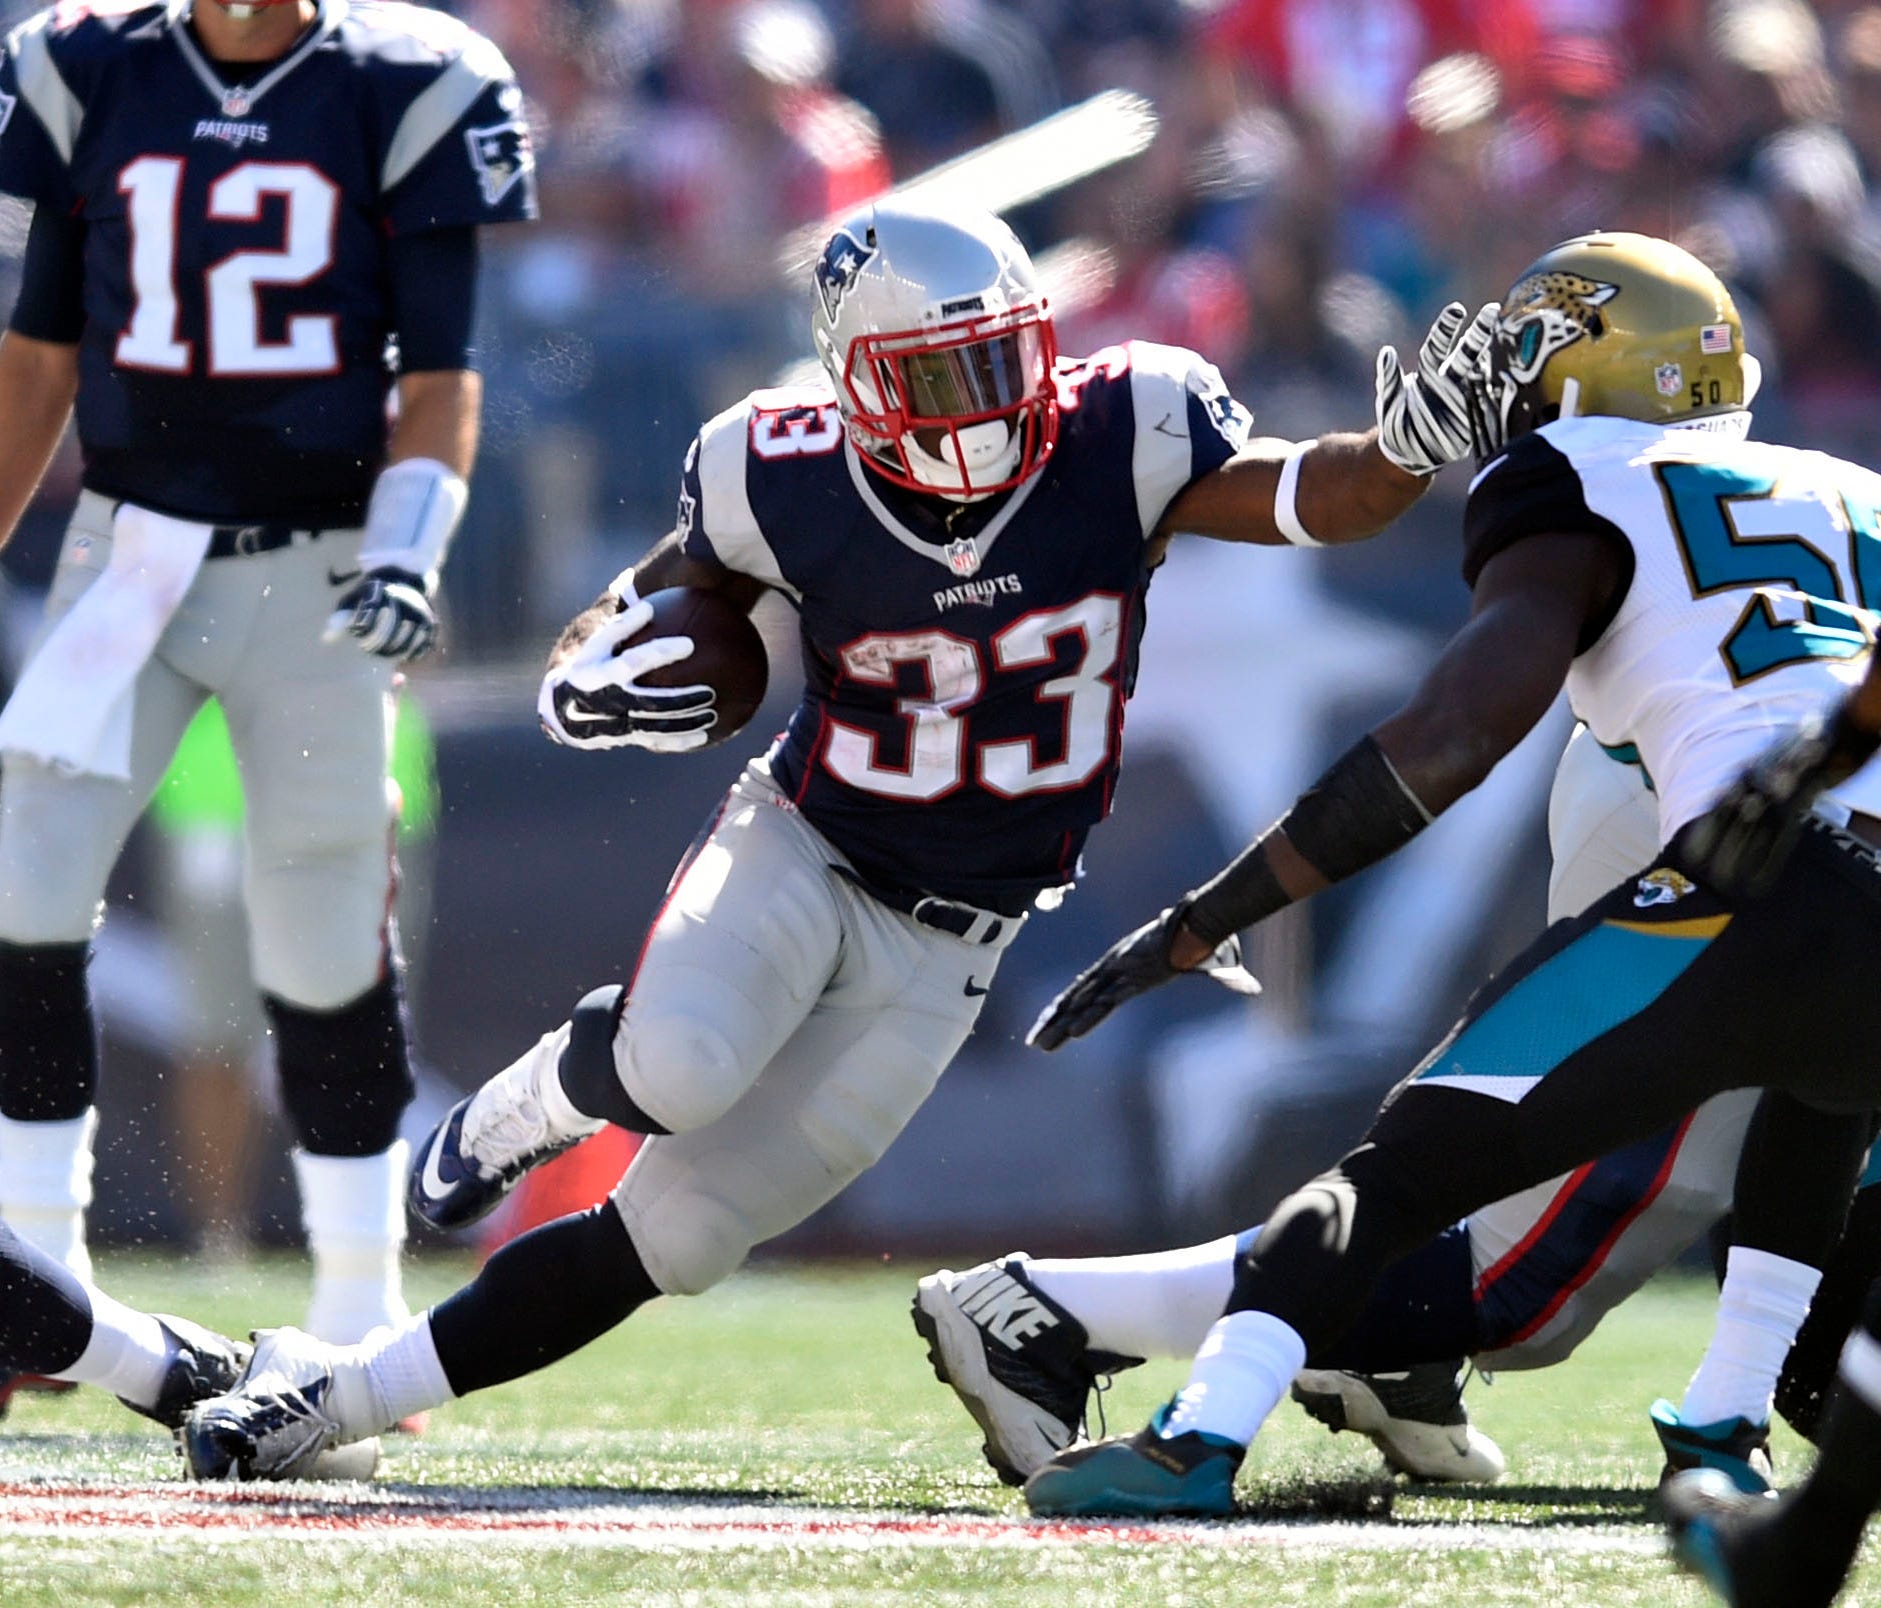 New England Patriots running back Dion Lewis (33) carries the ball in the first quarter against the Jacksonville Jaguars at Gillette Stadium.